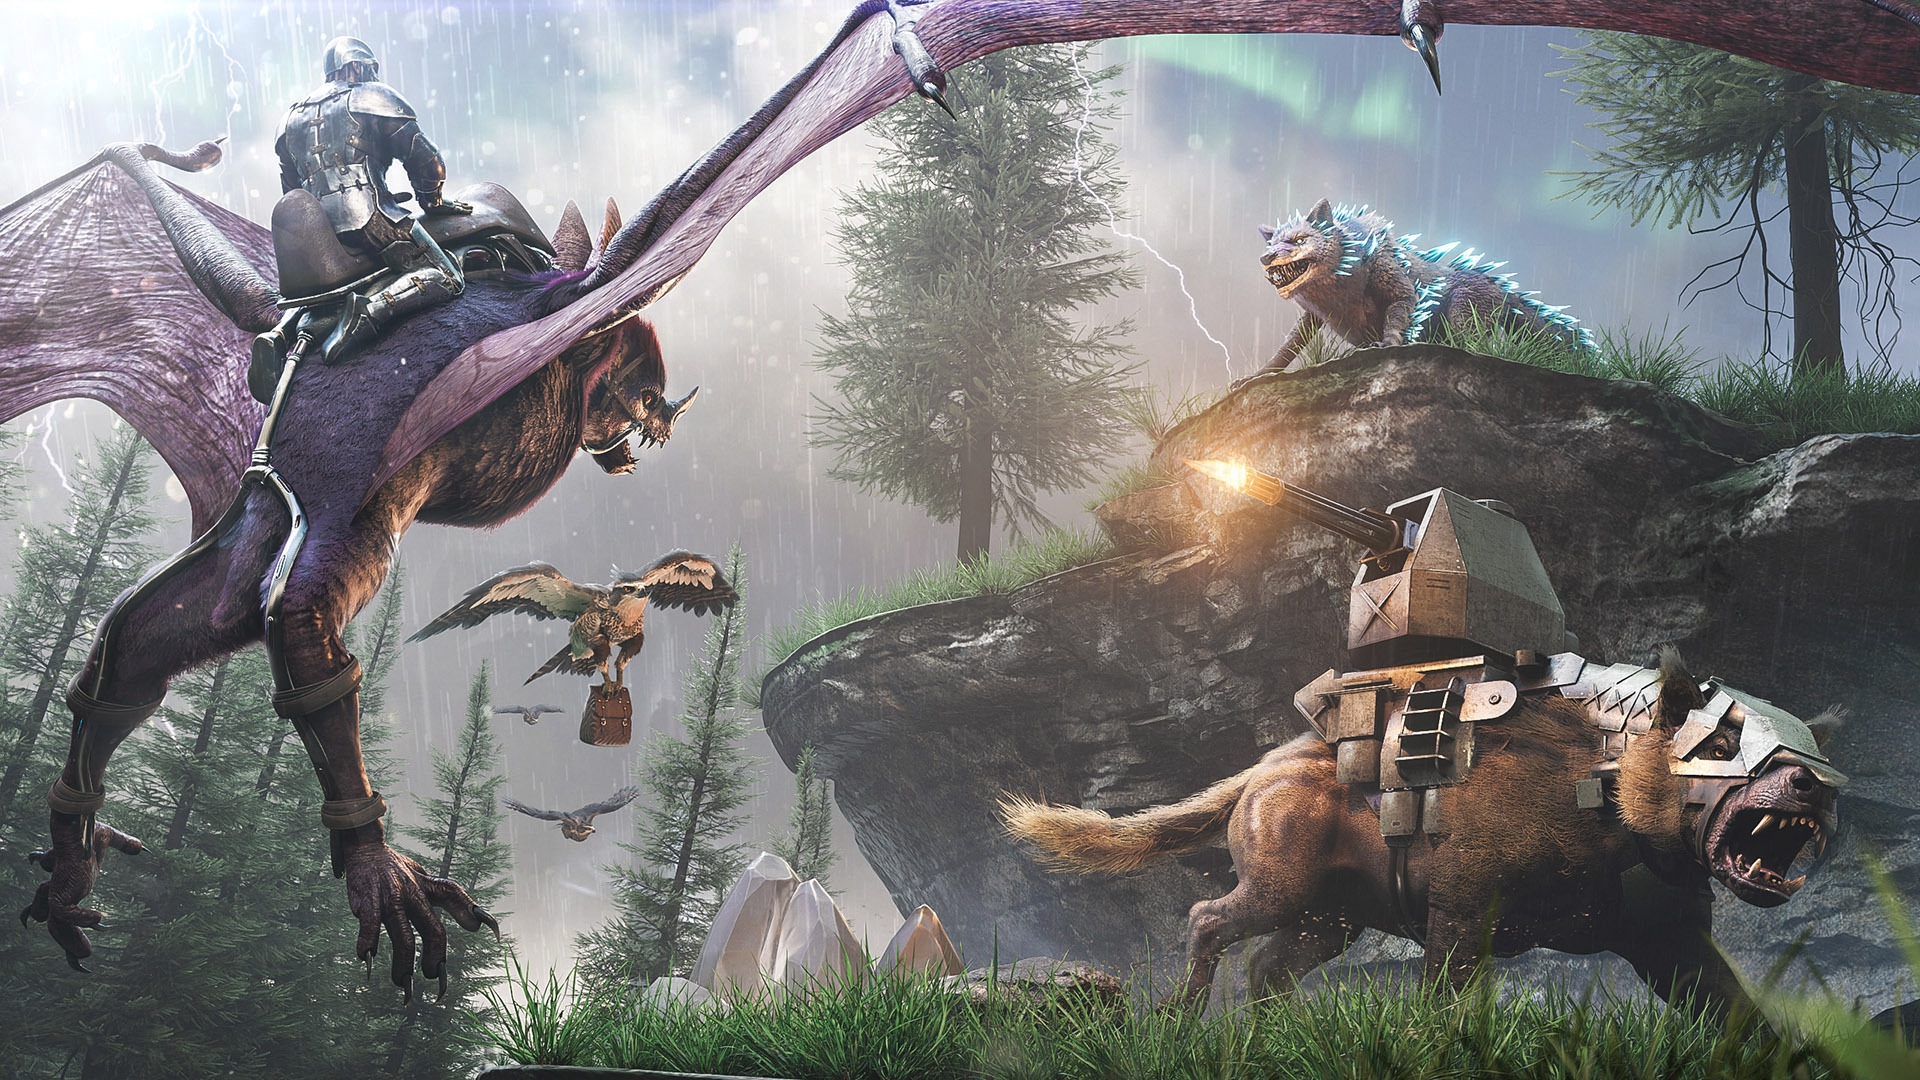 Ark: Survival Ascended finally releases on PS5 tomorrow